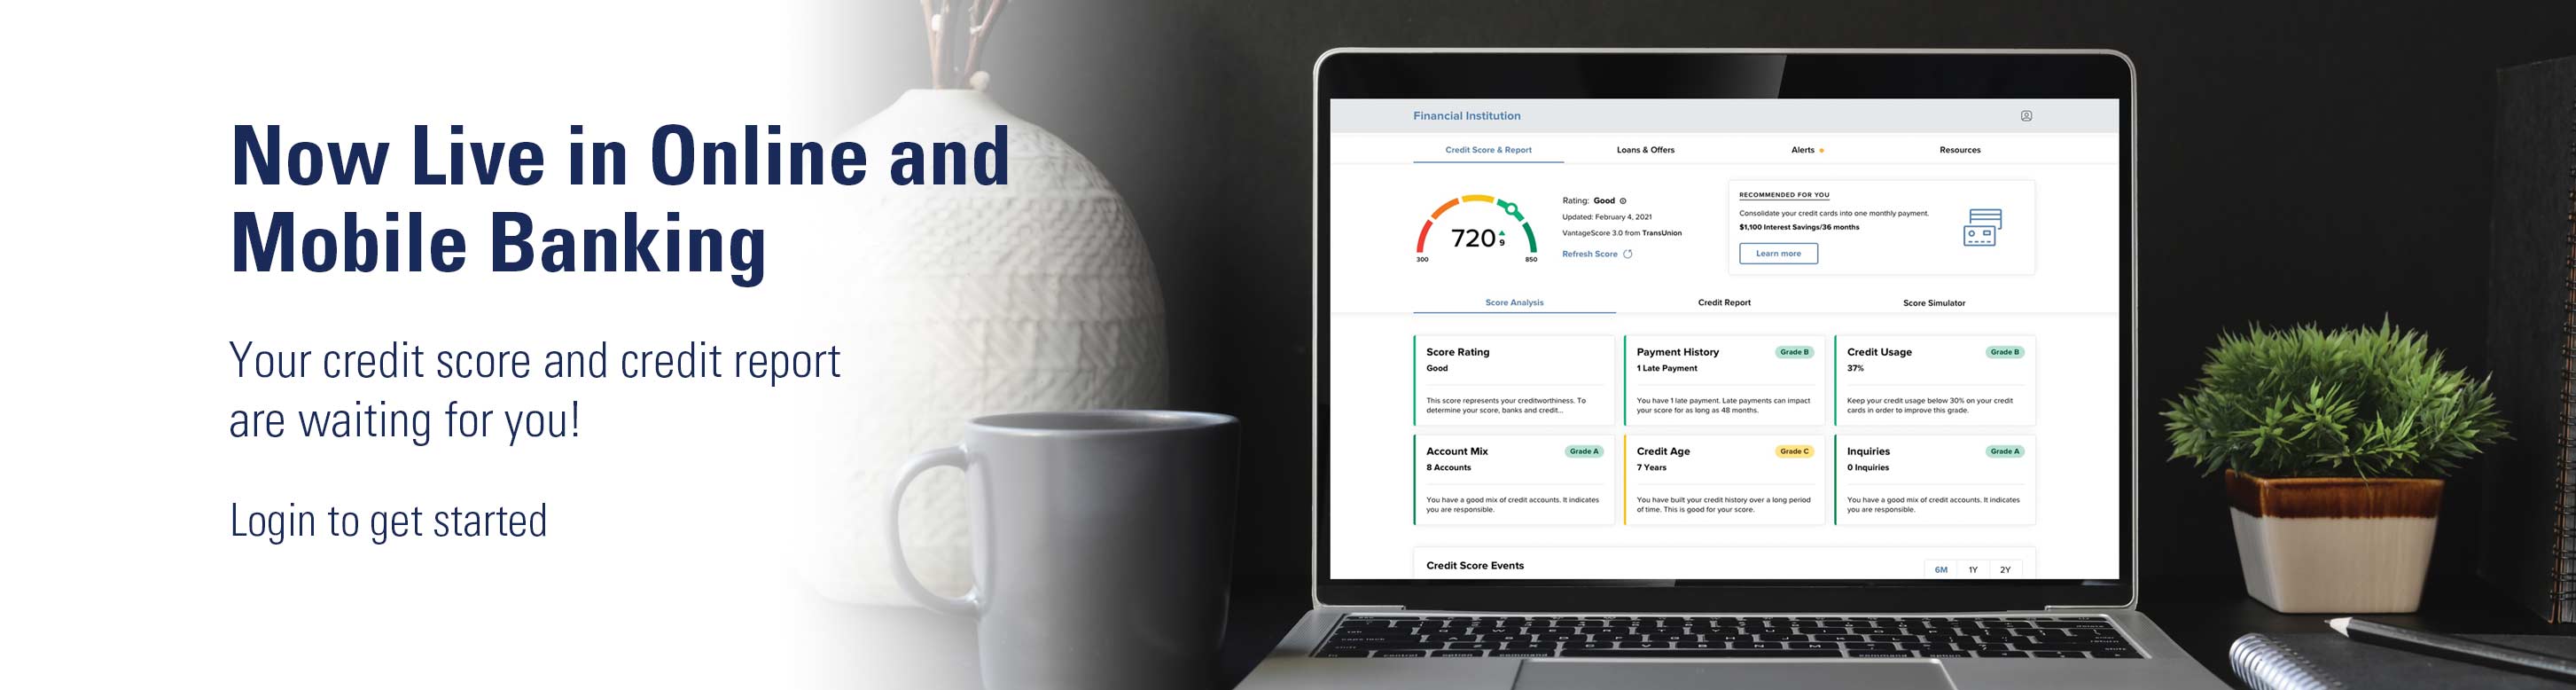 Now live in online and mobile banking. Your credit score and credit report are waiting for you! Login to get started